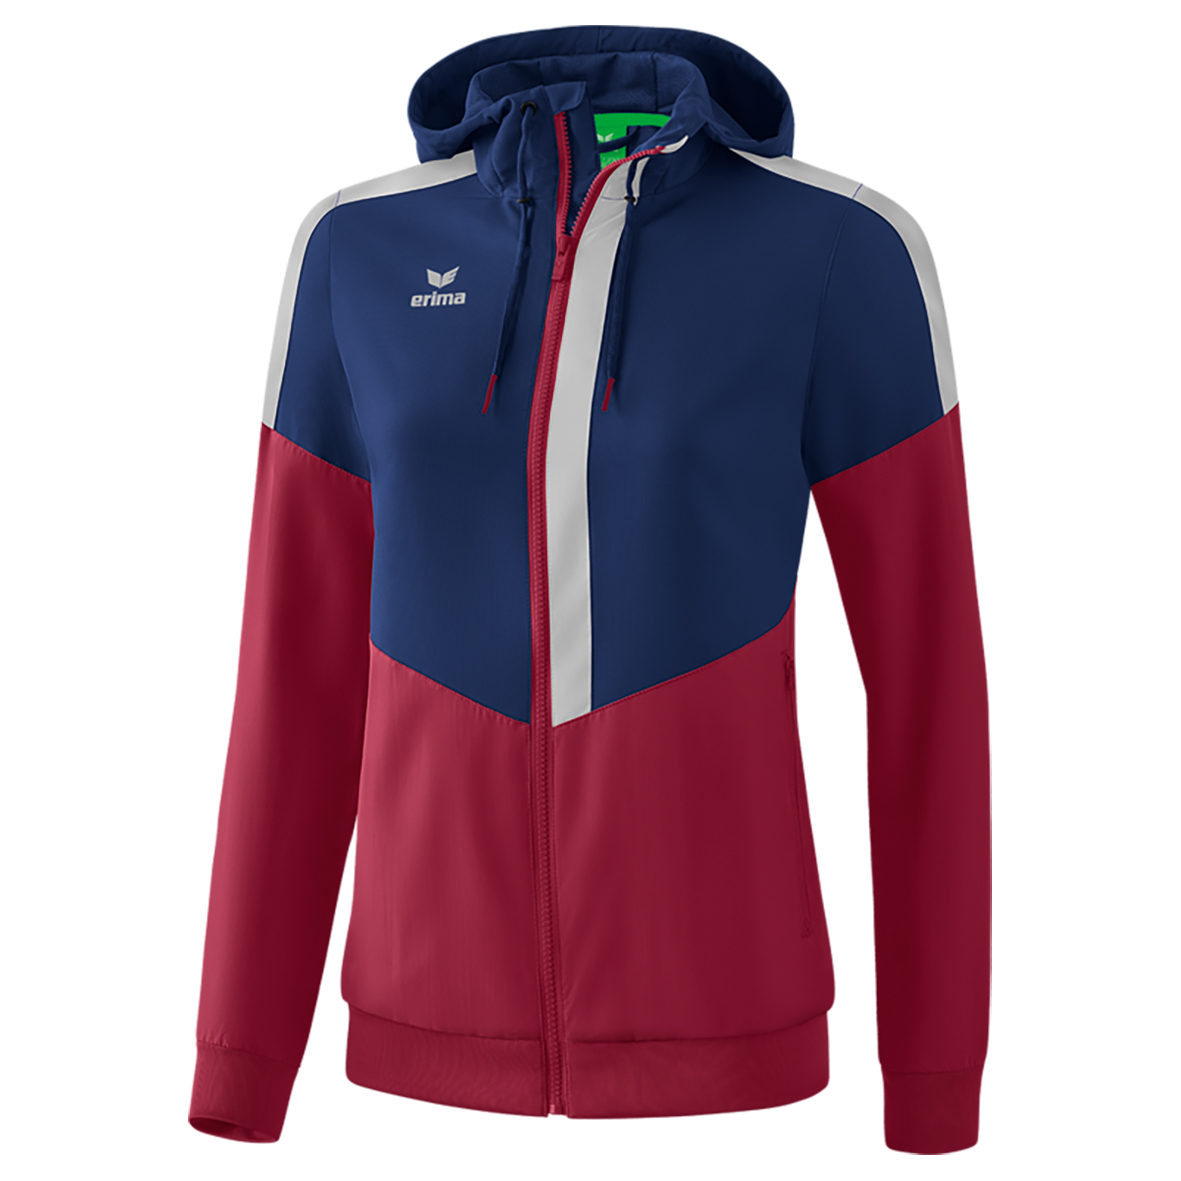 ERIMA SQUAD TRACK TOP JACKET WITH HOOD, NAVY-BORDEAUX-SILVER WOMEN.